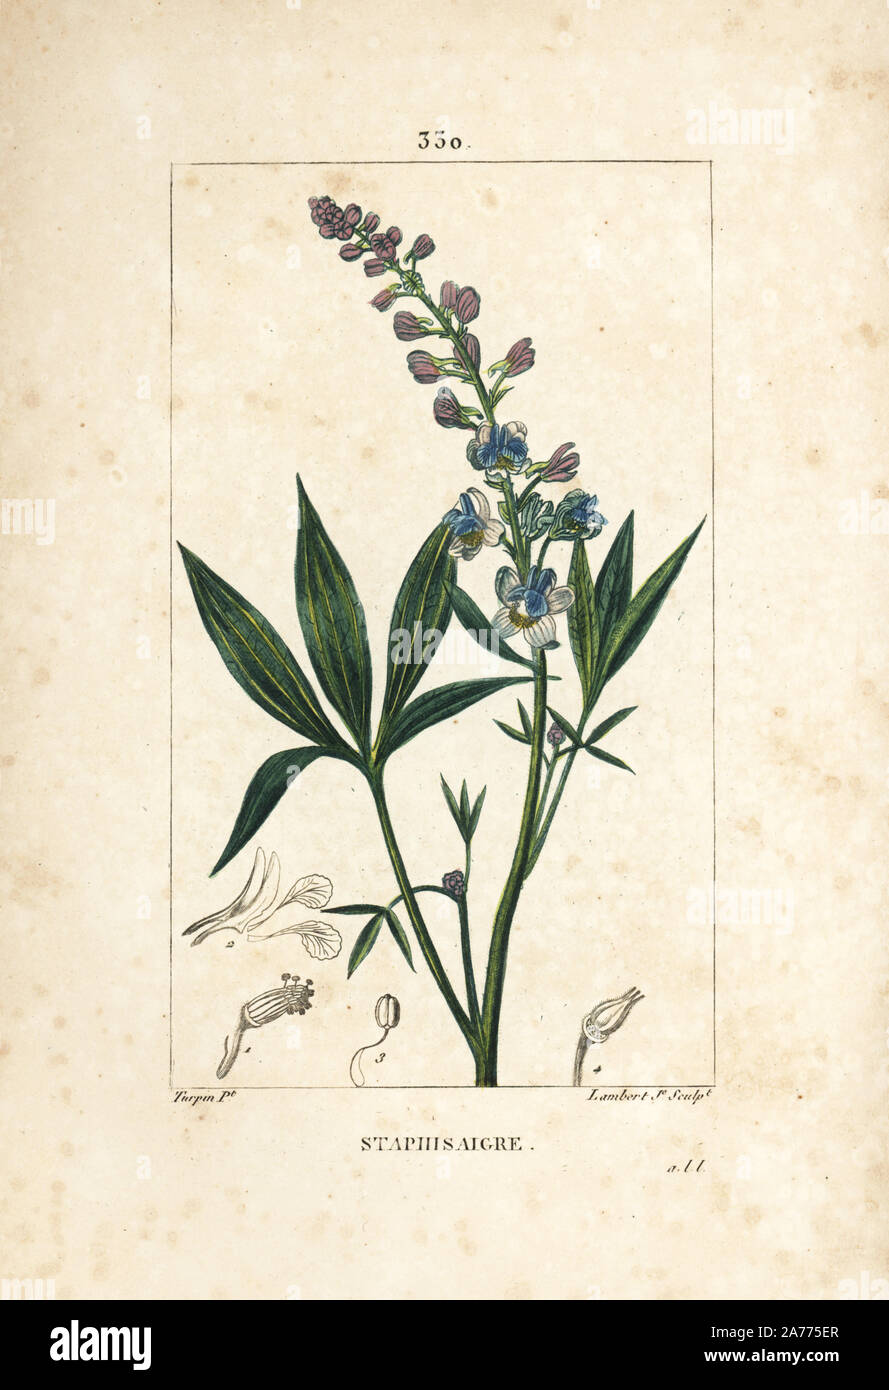 Lice-bane or stavesacre, Delphinium staphisagria, with flower, leaf, stalk and seed. Handcoloured stipple copperplate engraving by Lambert Junior from a drawing by Pierre Jean-Francois Turpin from Chaumeton, Poiret and Chamberet's 'La Flore Medicale,' Paris, Panckoucke, 1830. Turpin (17751840) was one of the three giants of French botanical art of the era alongside Pierre Joseph Redoute and Pancrace Bessa. Stock Photo